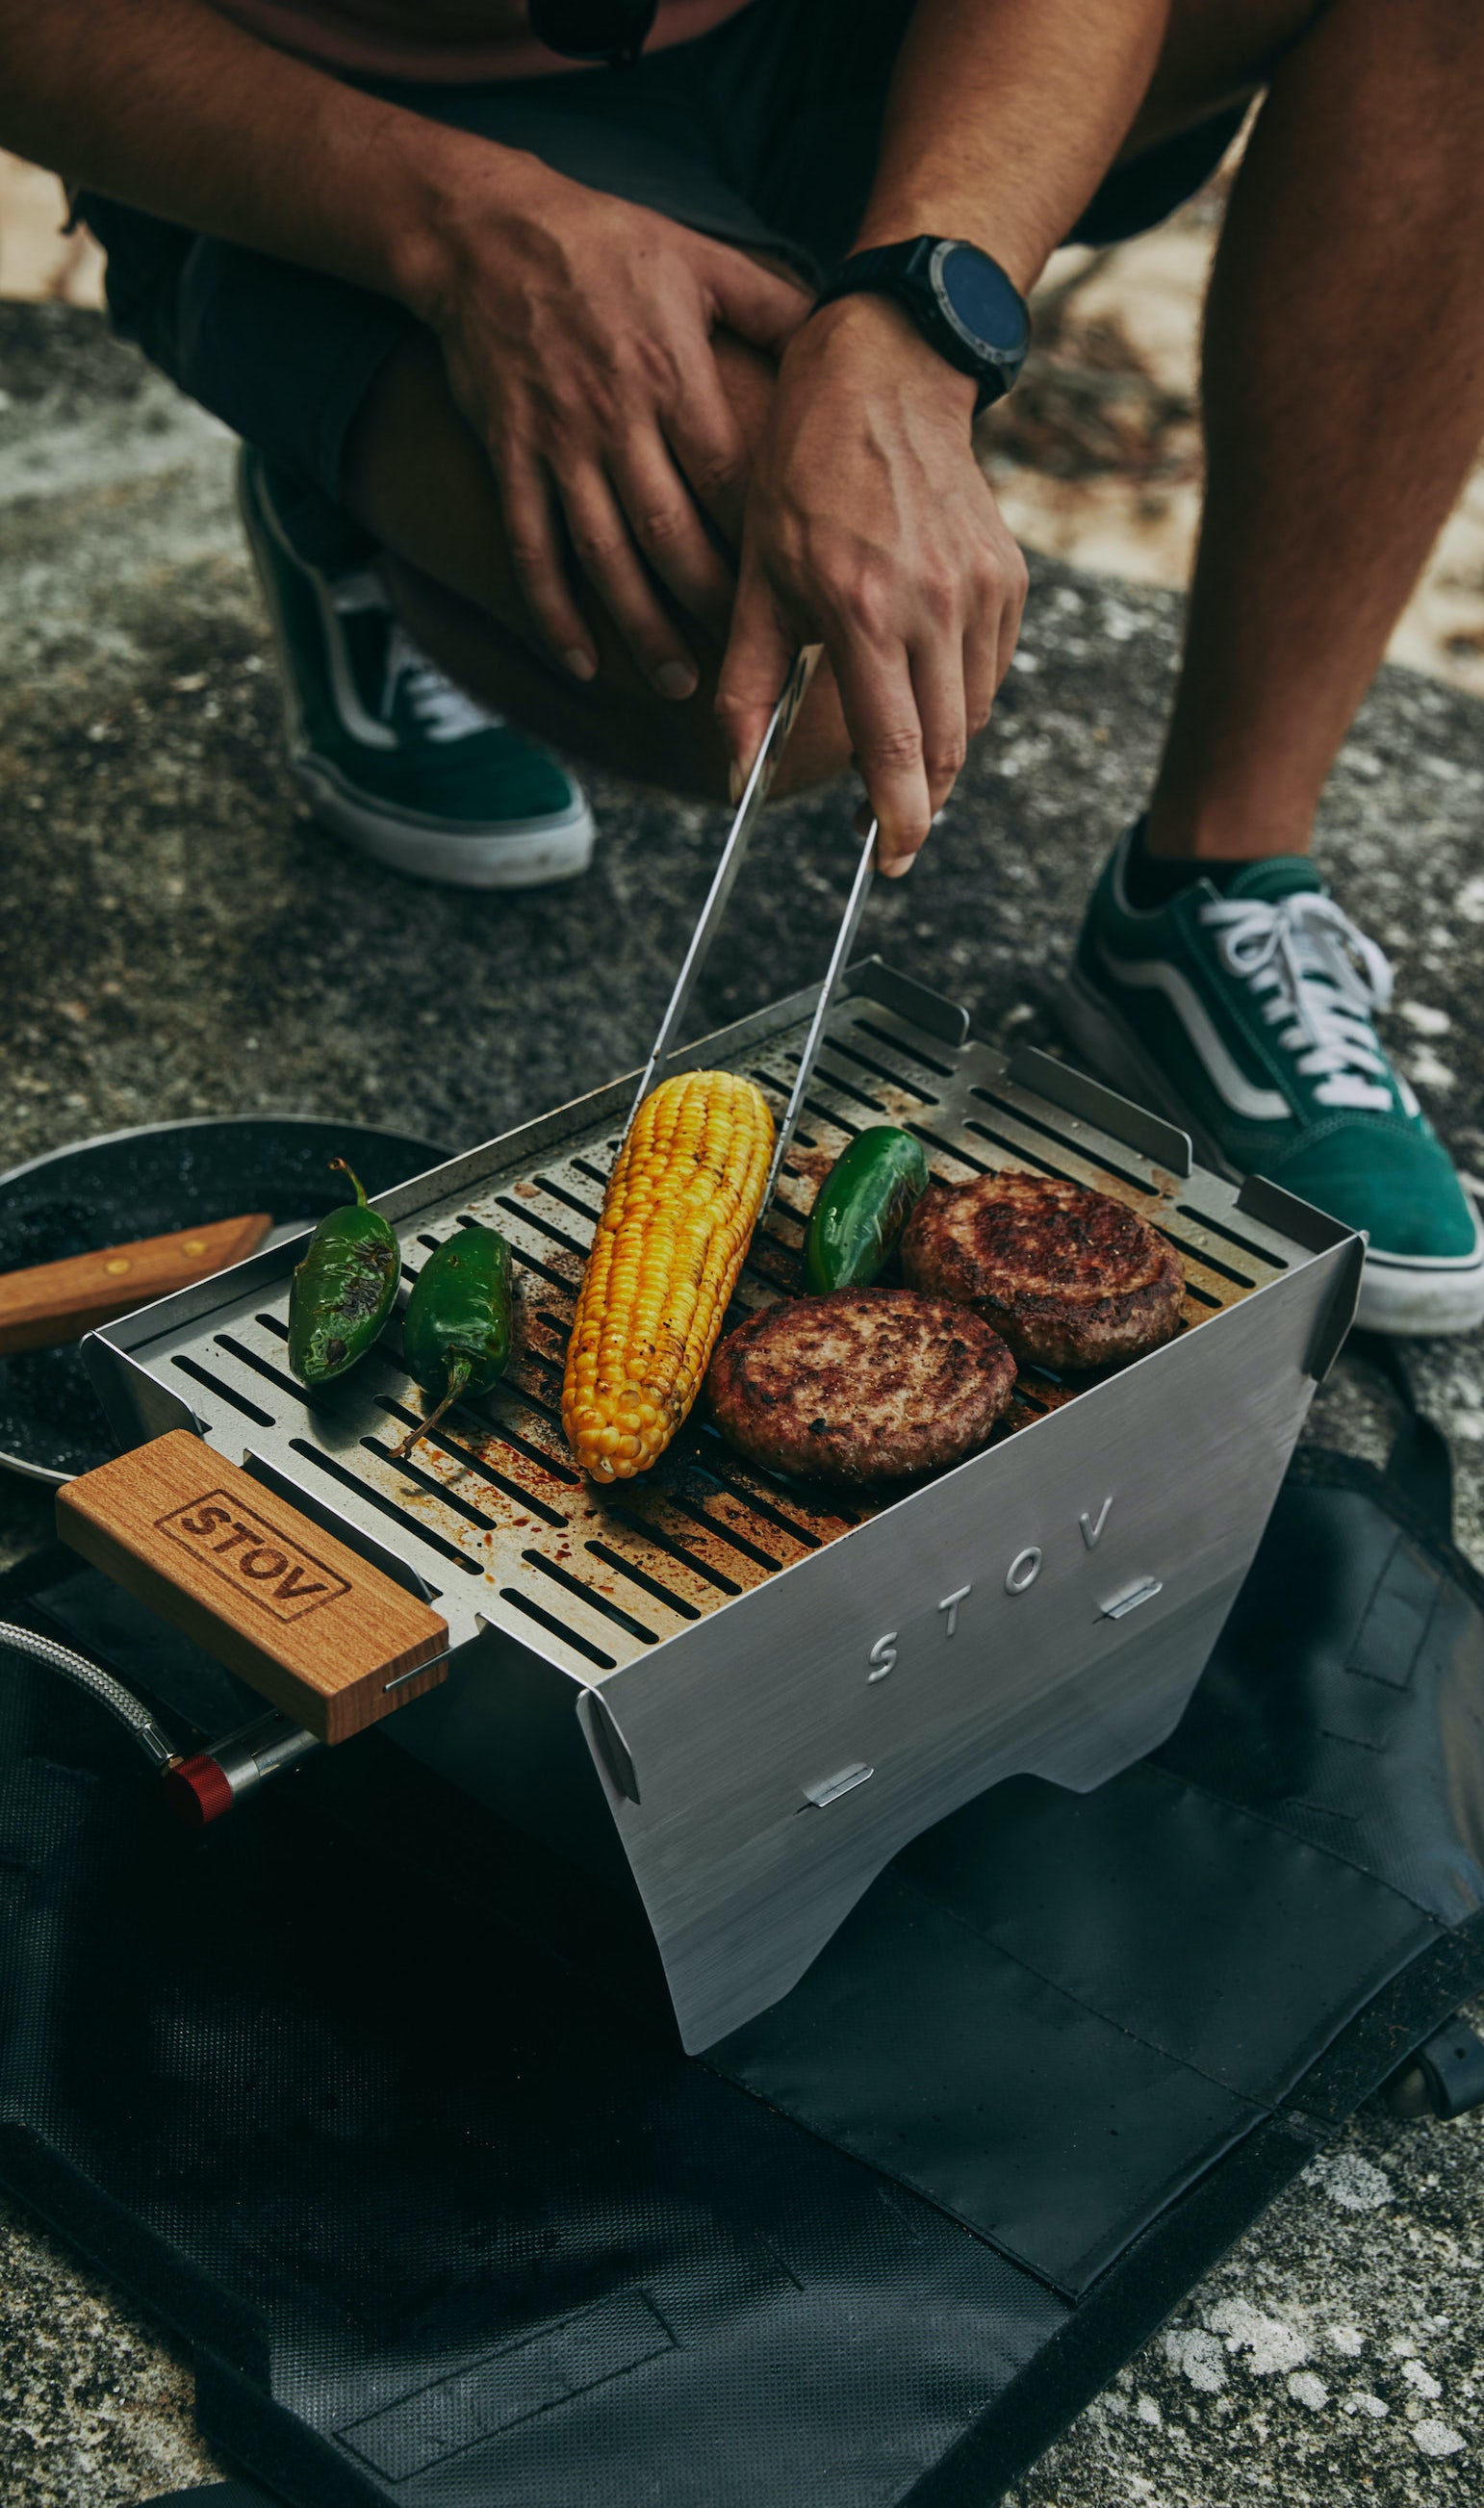 Best portable bbq for outdoor cooking and camping - the compact STOV gas BBQ set up cooking really good food